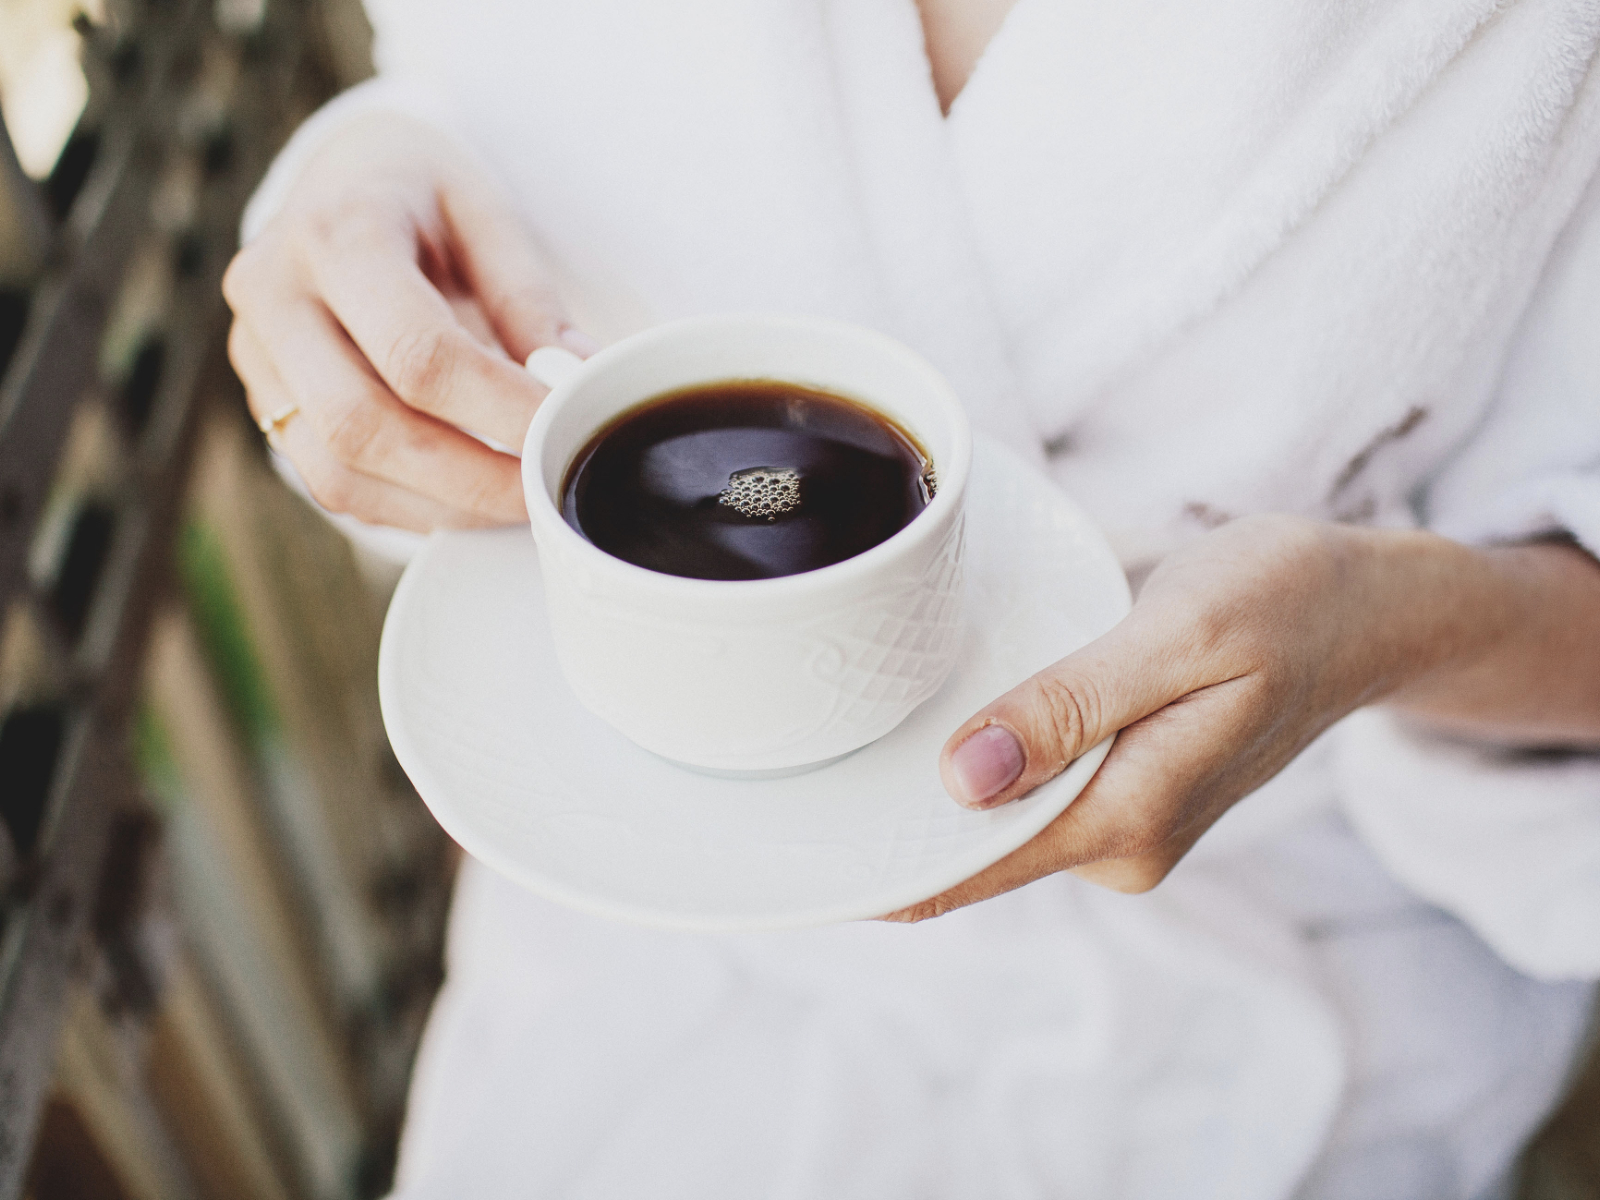 person drinking coffee in the morning wearing a robe